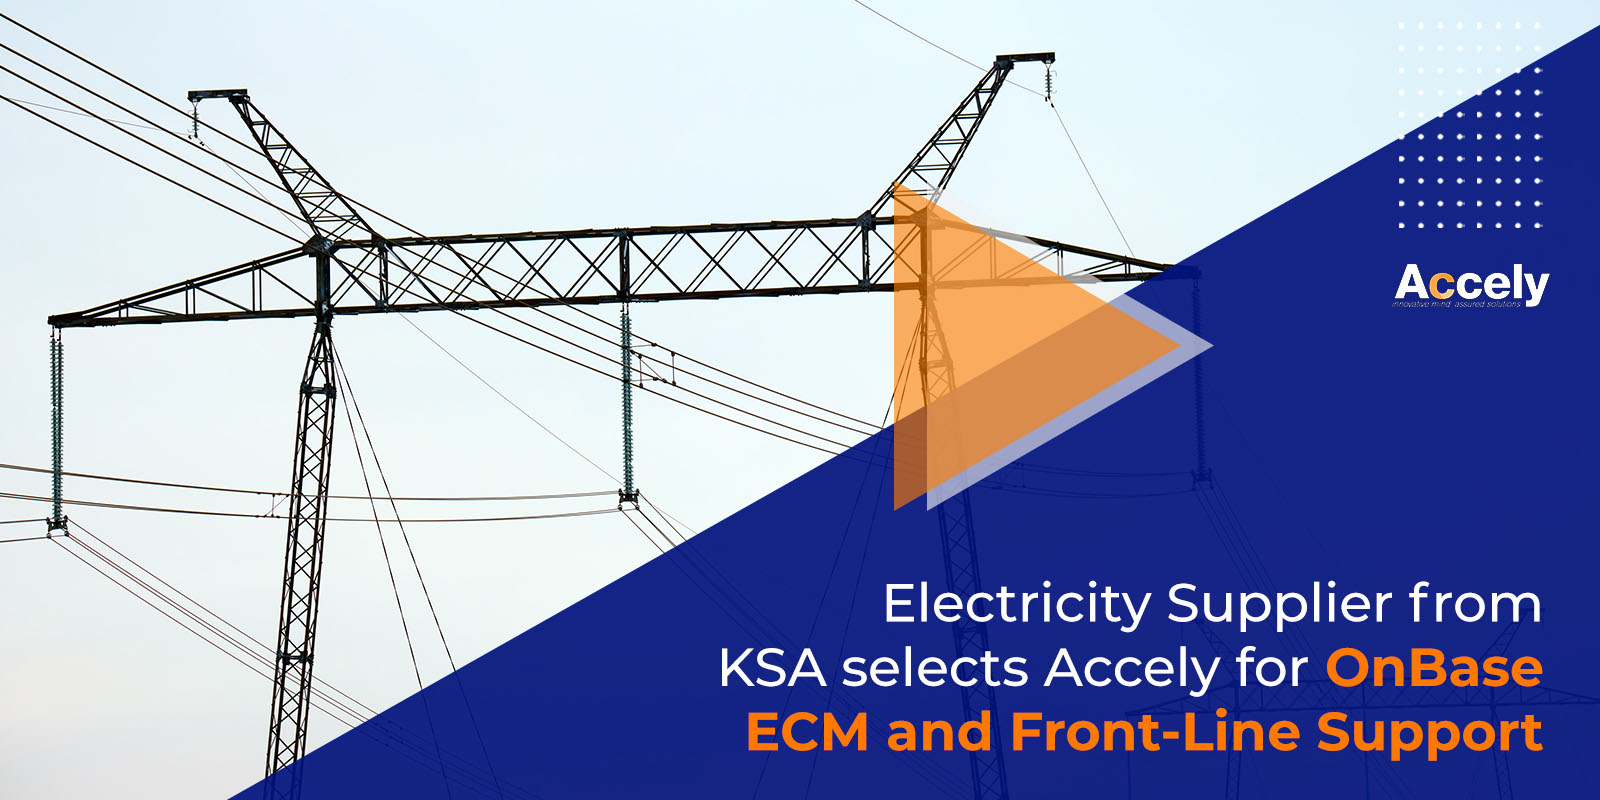 Electricity Supplier from KSA selects Accely for OnBase ECM and Front-Line Support